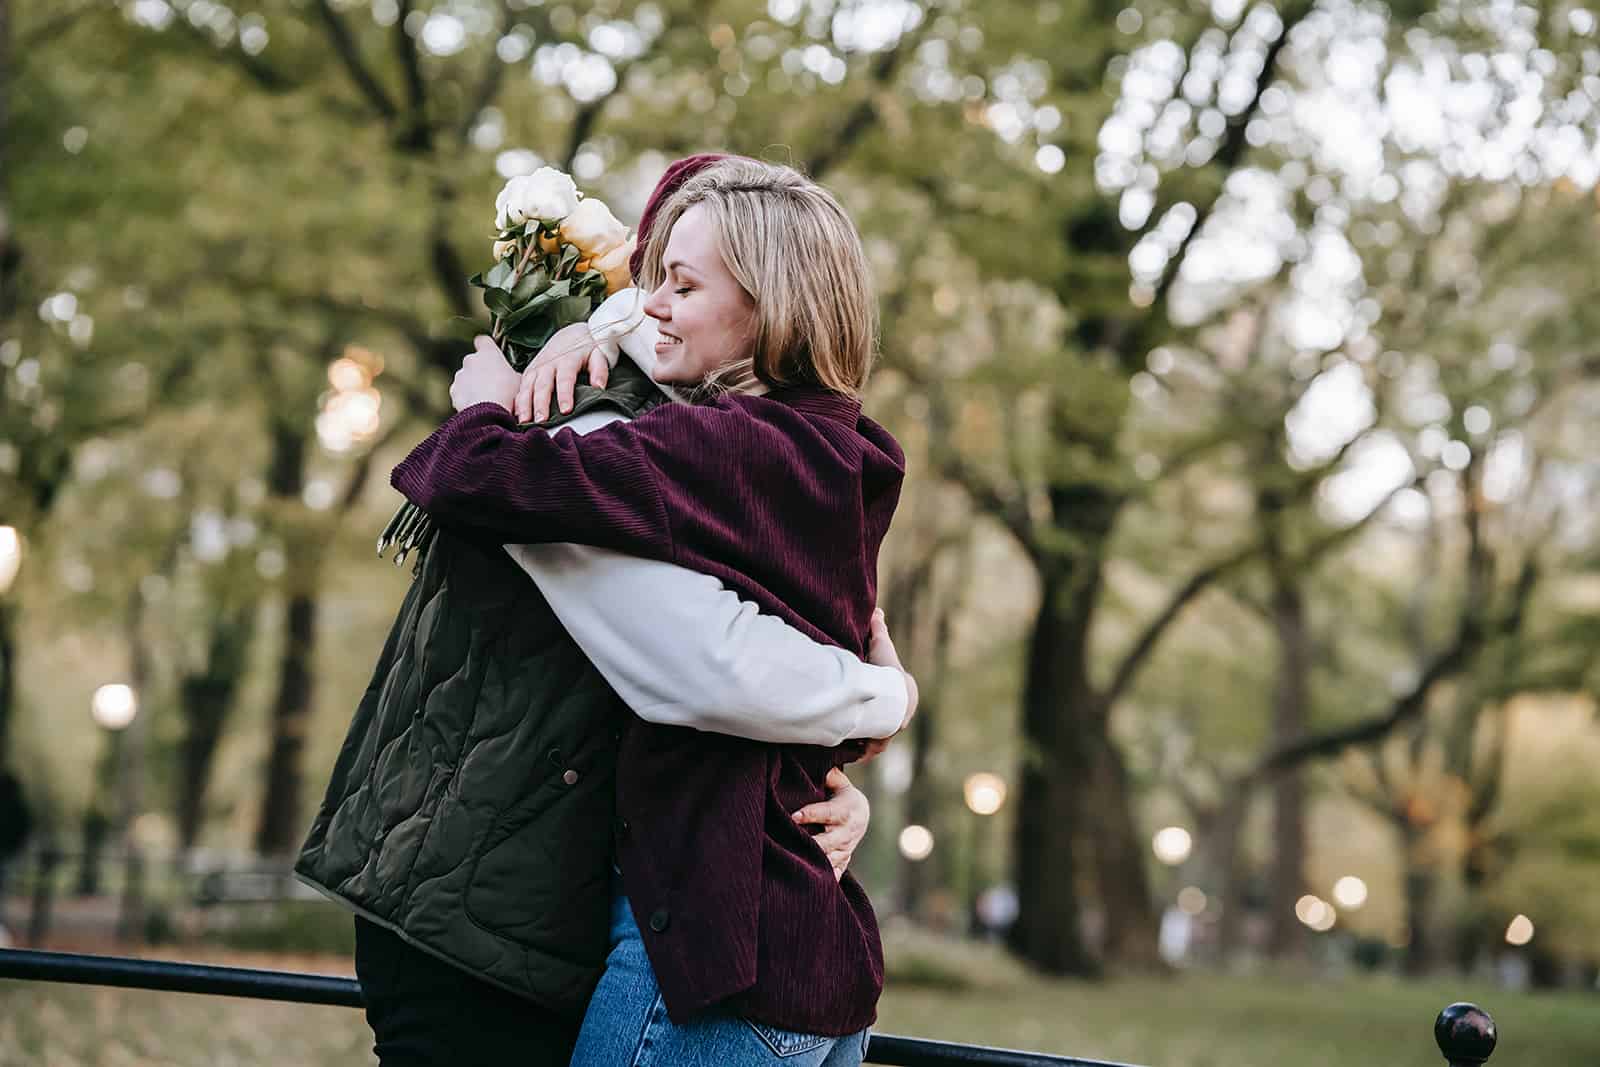 man and woman hugging in the park while woman holding bouquet of white roses